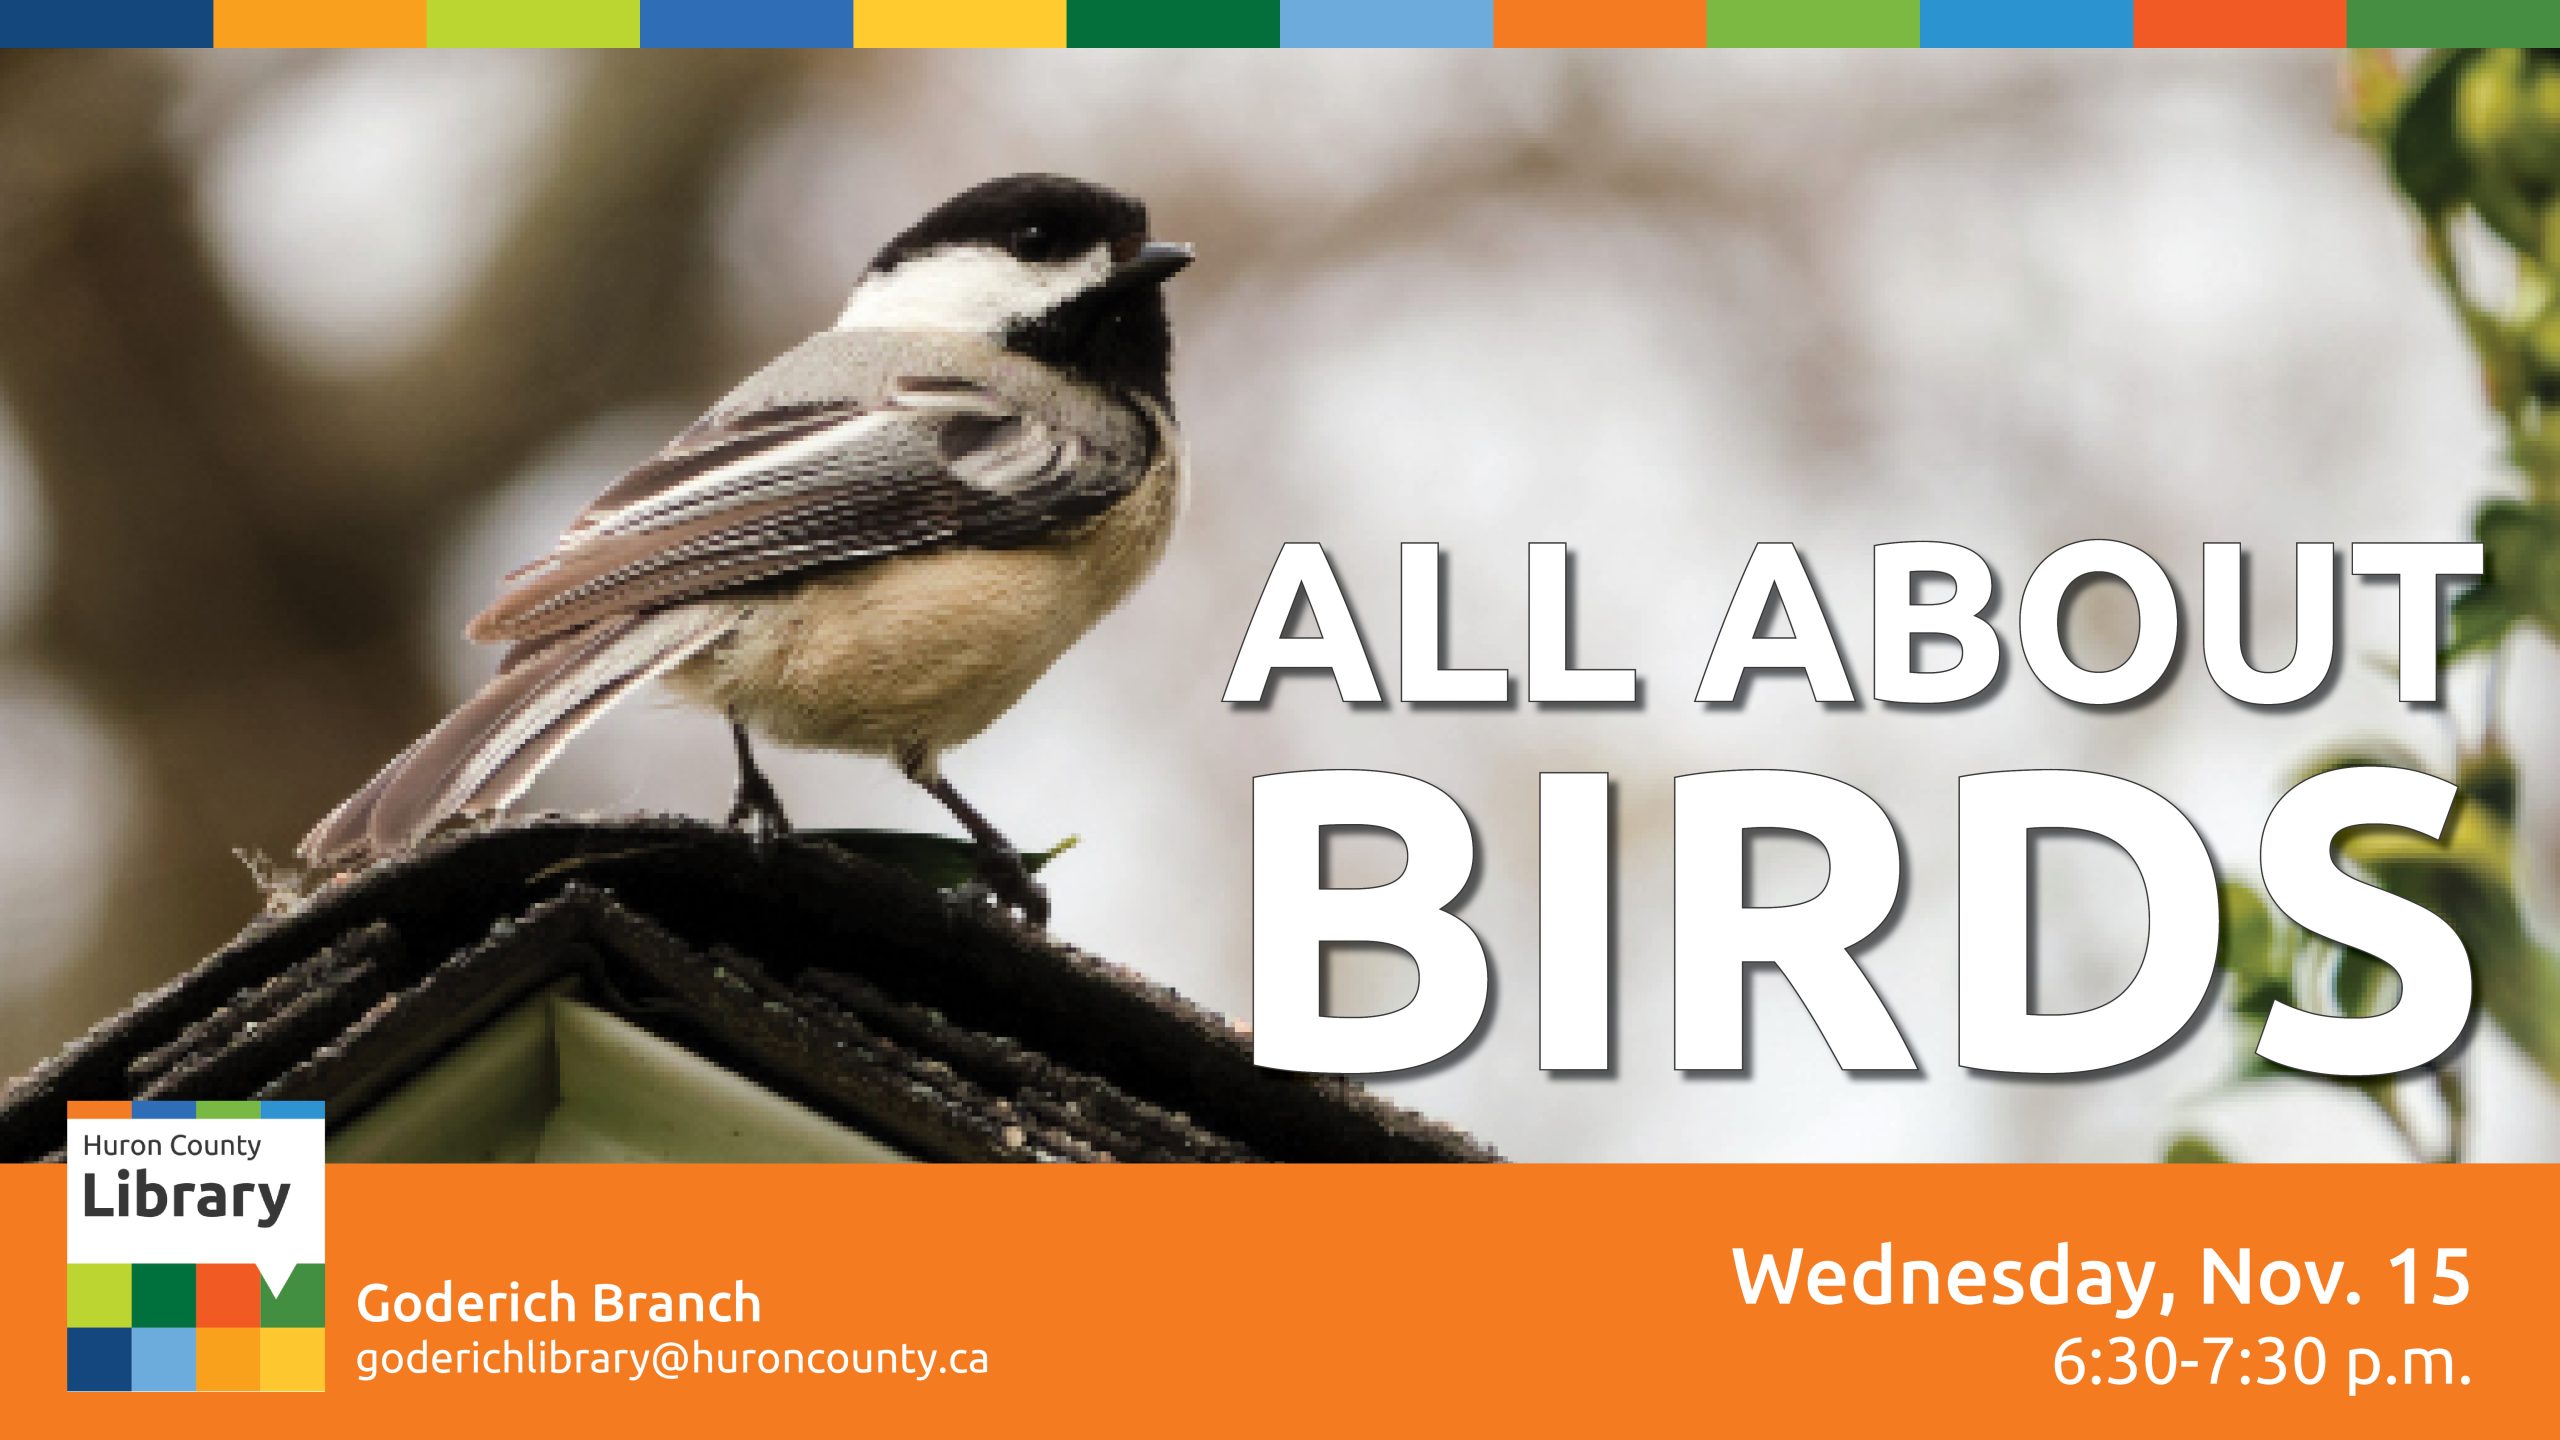 Photo of a chickadee with text promoting All About Birds at the Goderich Branch